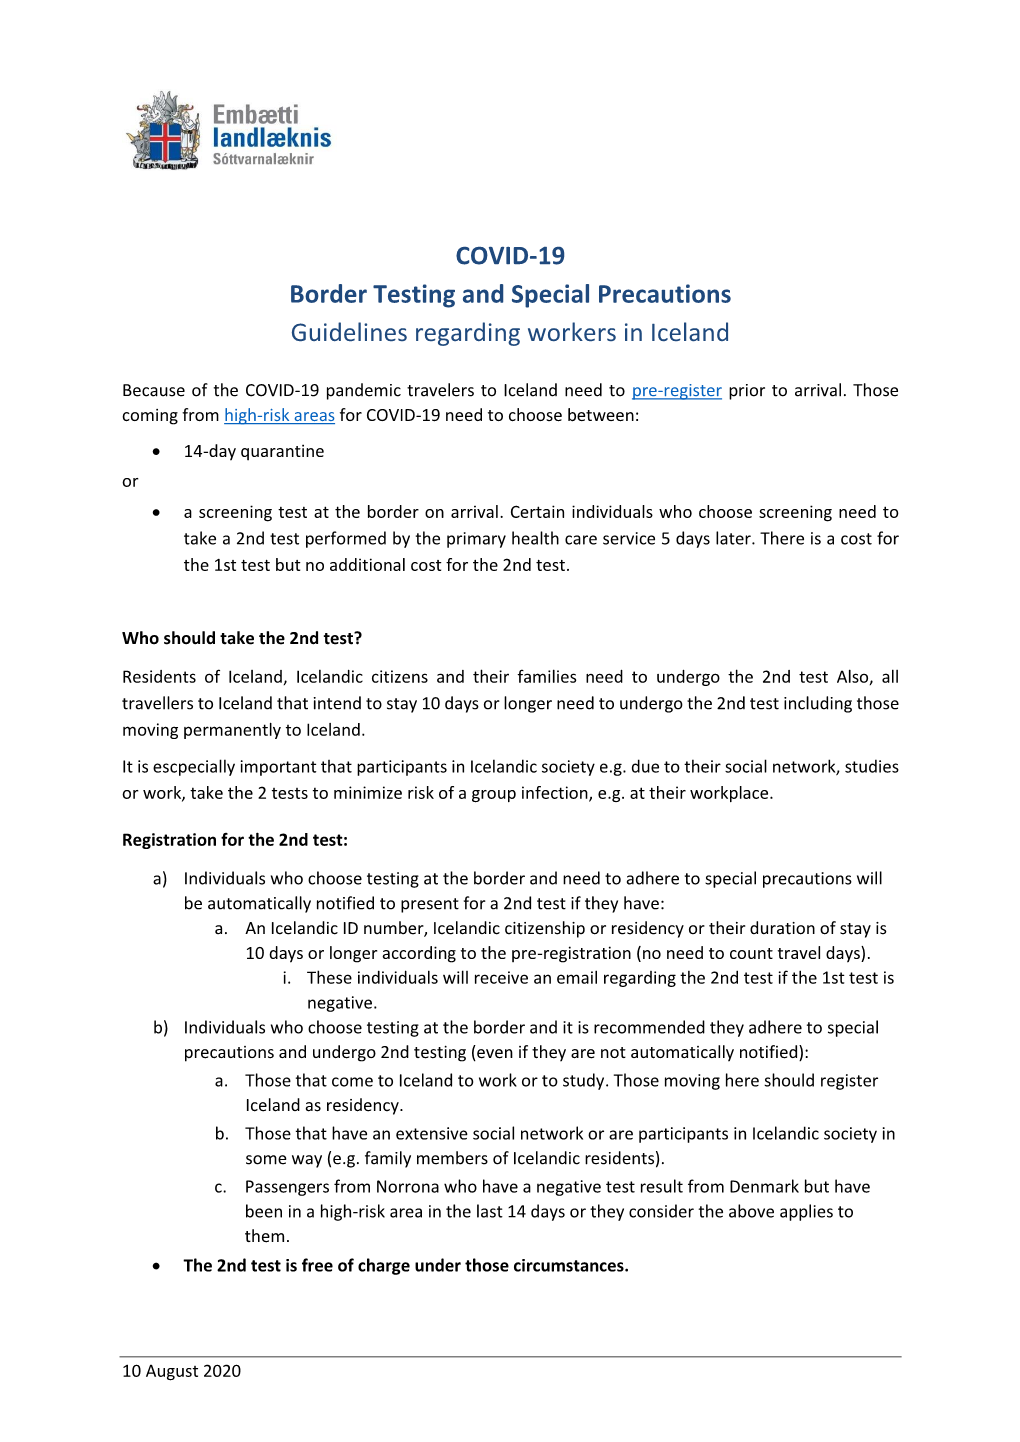 COVID-19 Border Testing and Special Precautions Guidelines Regarding Workers in Iceland